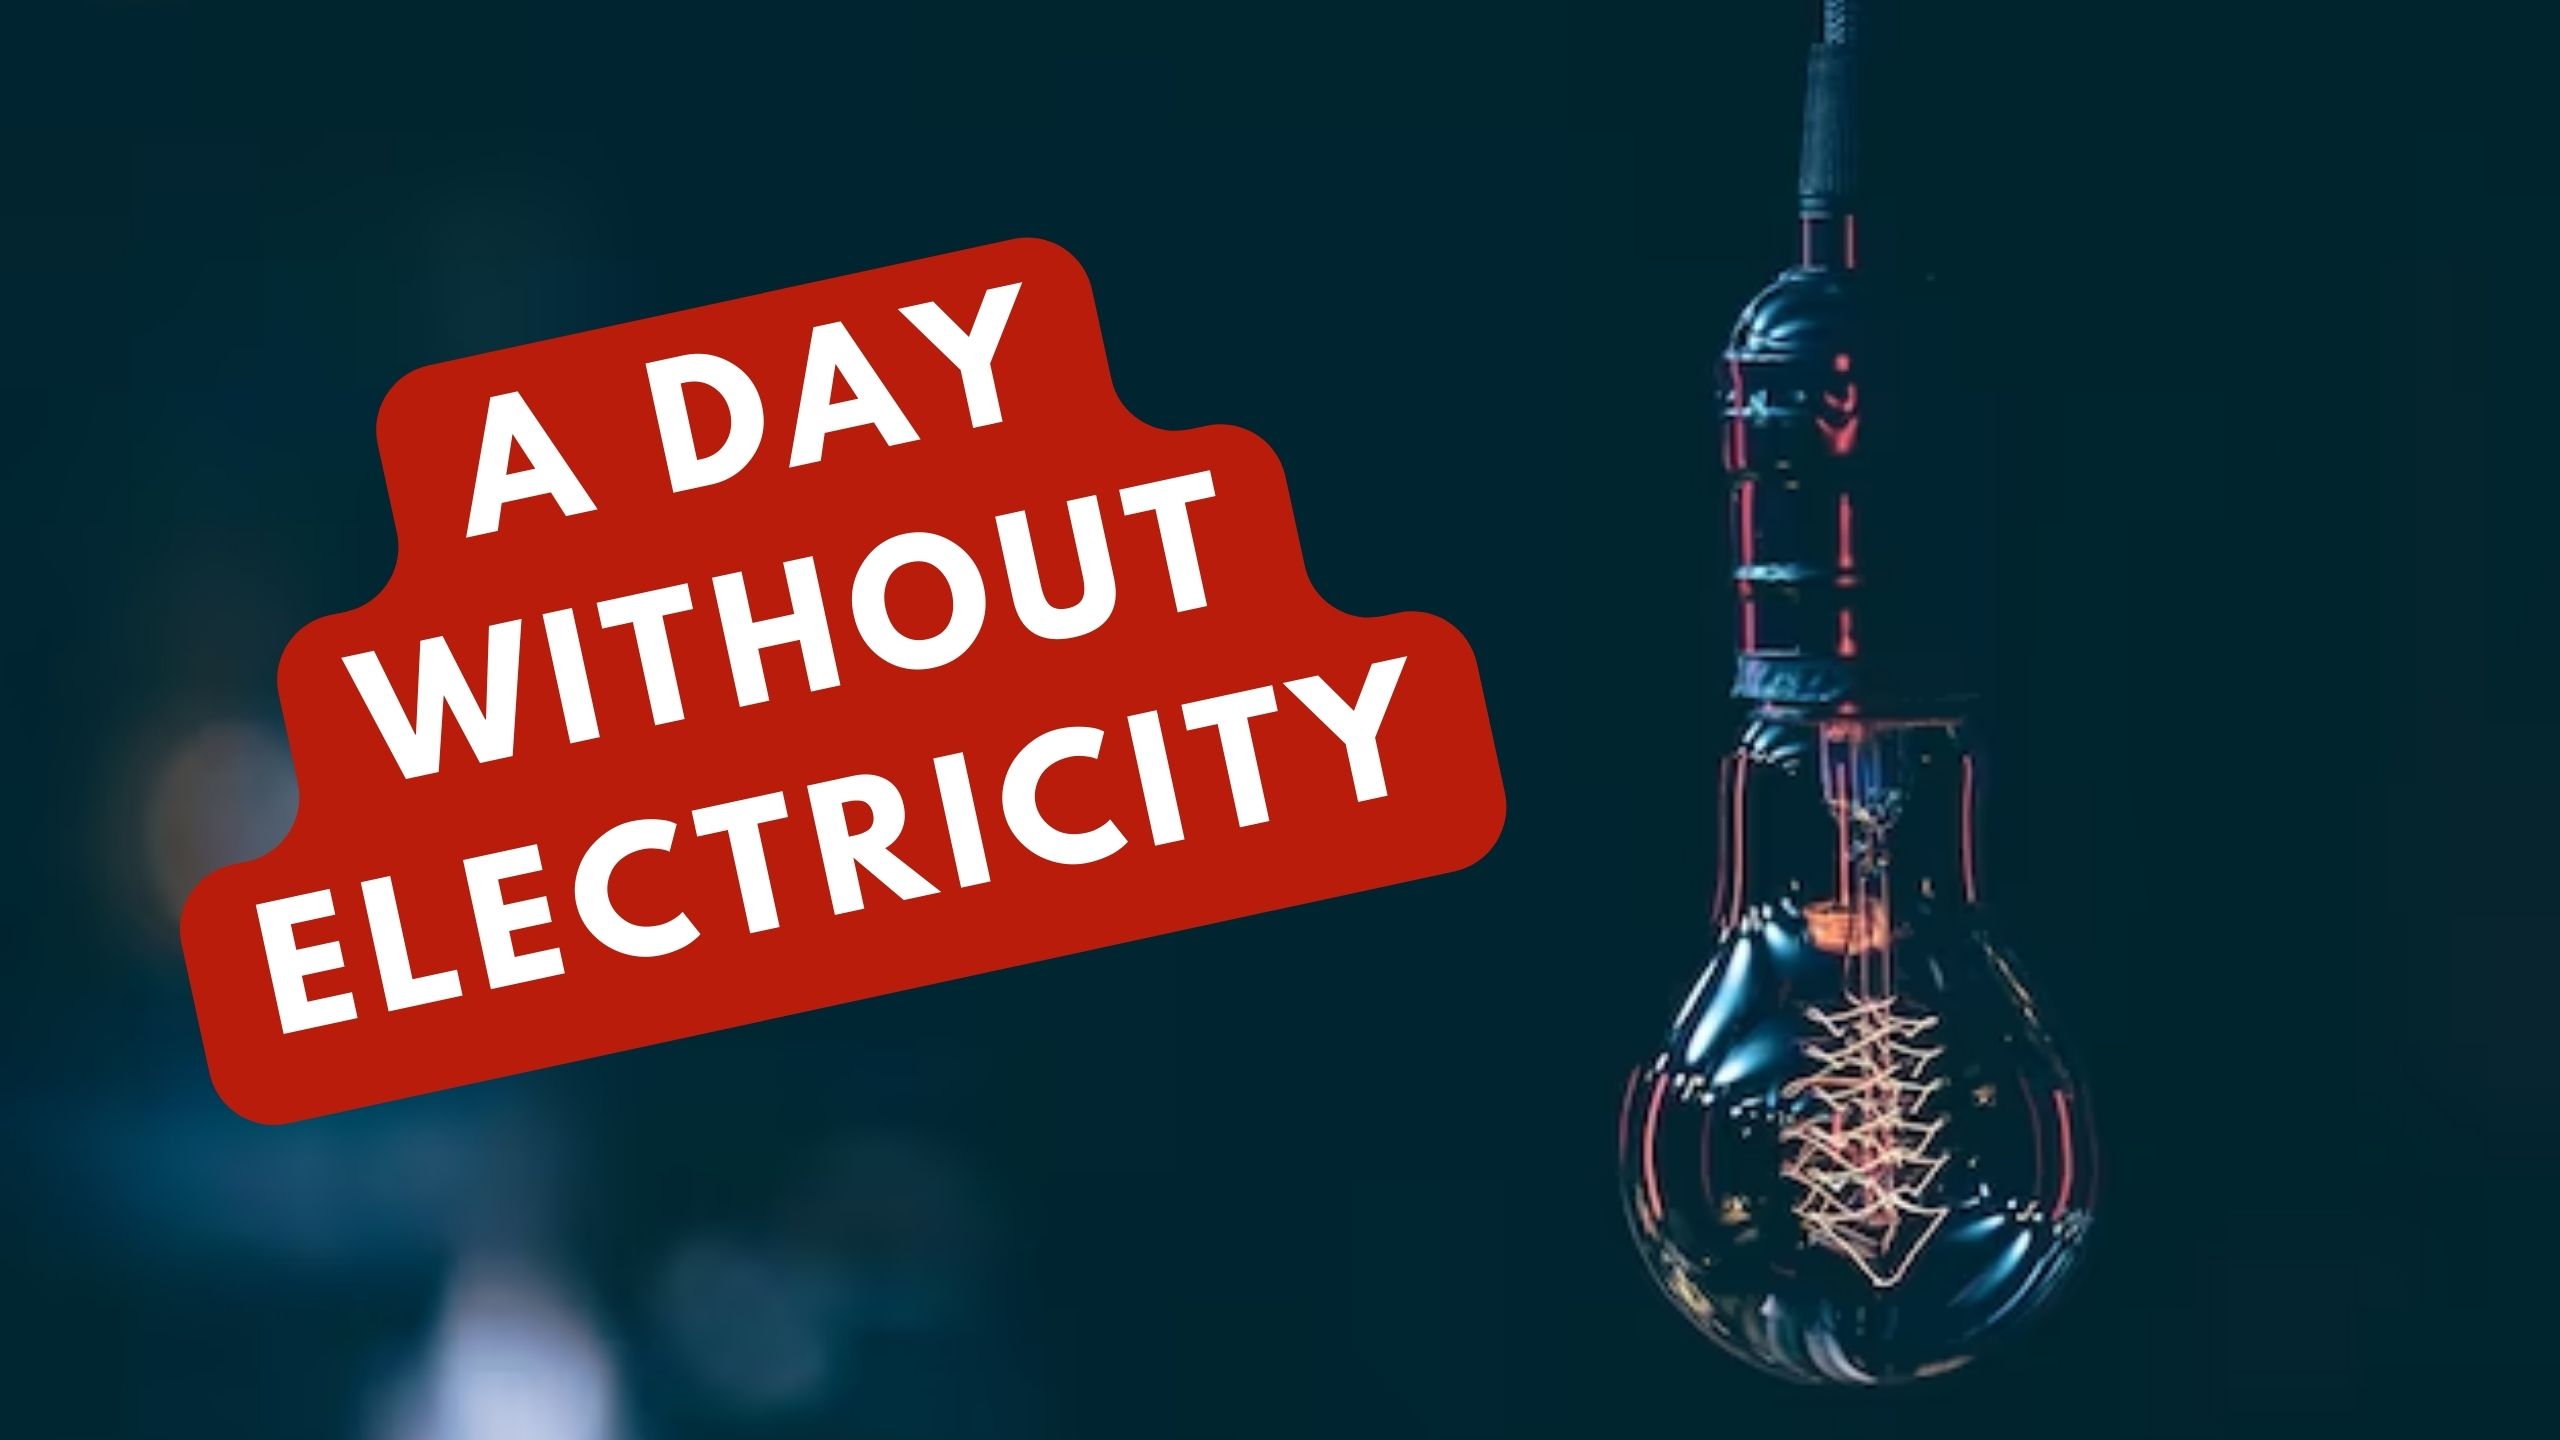 Essay on A Day Without Electricity